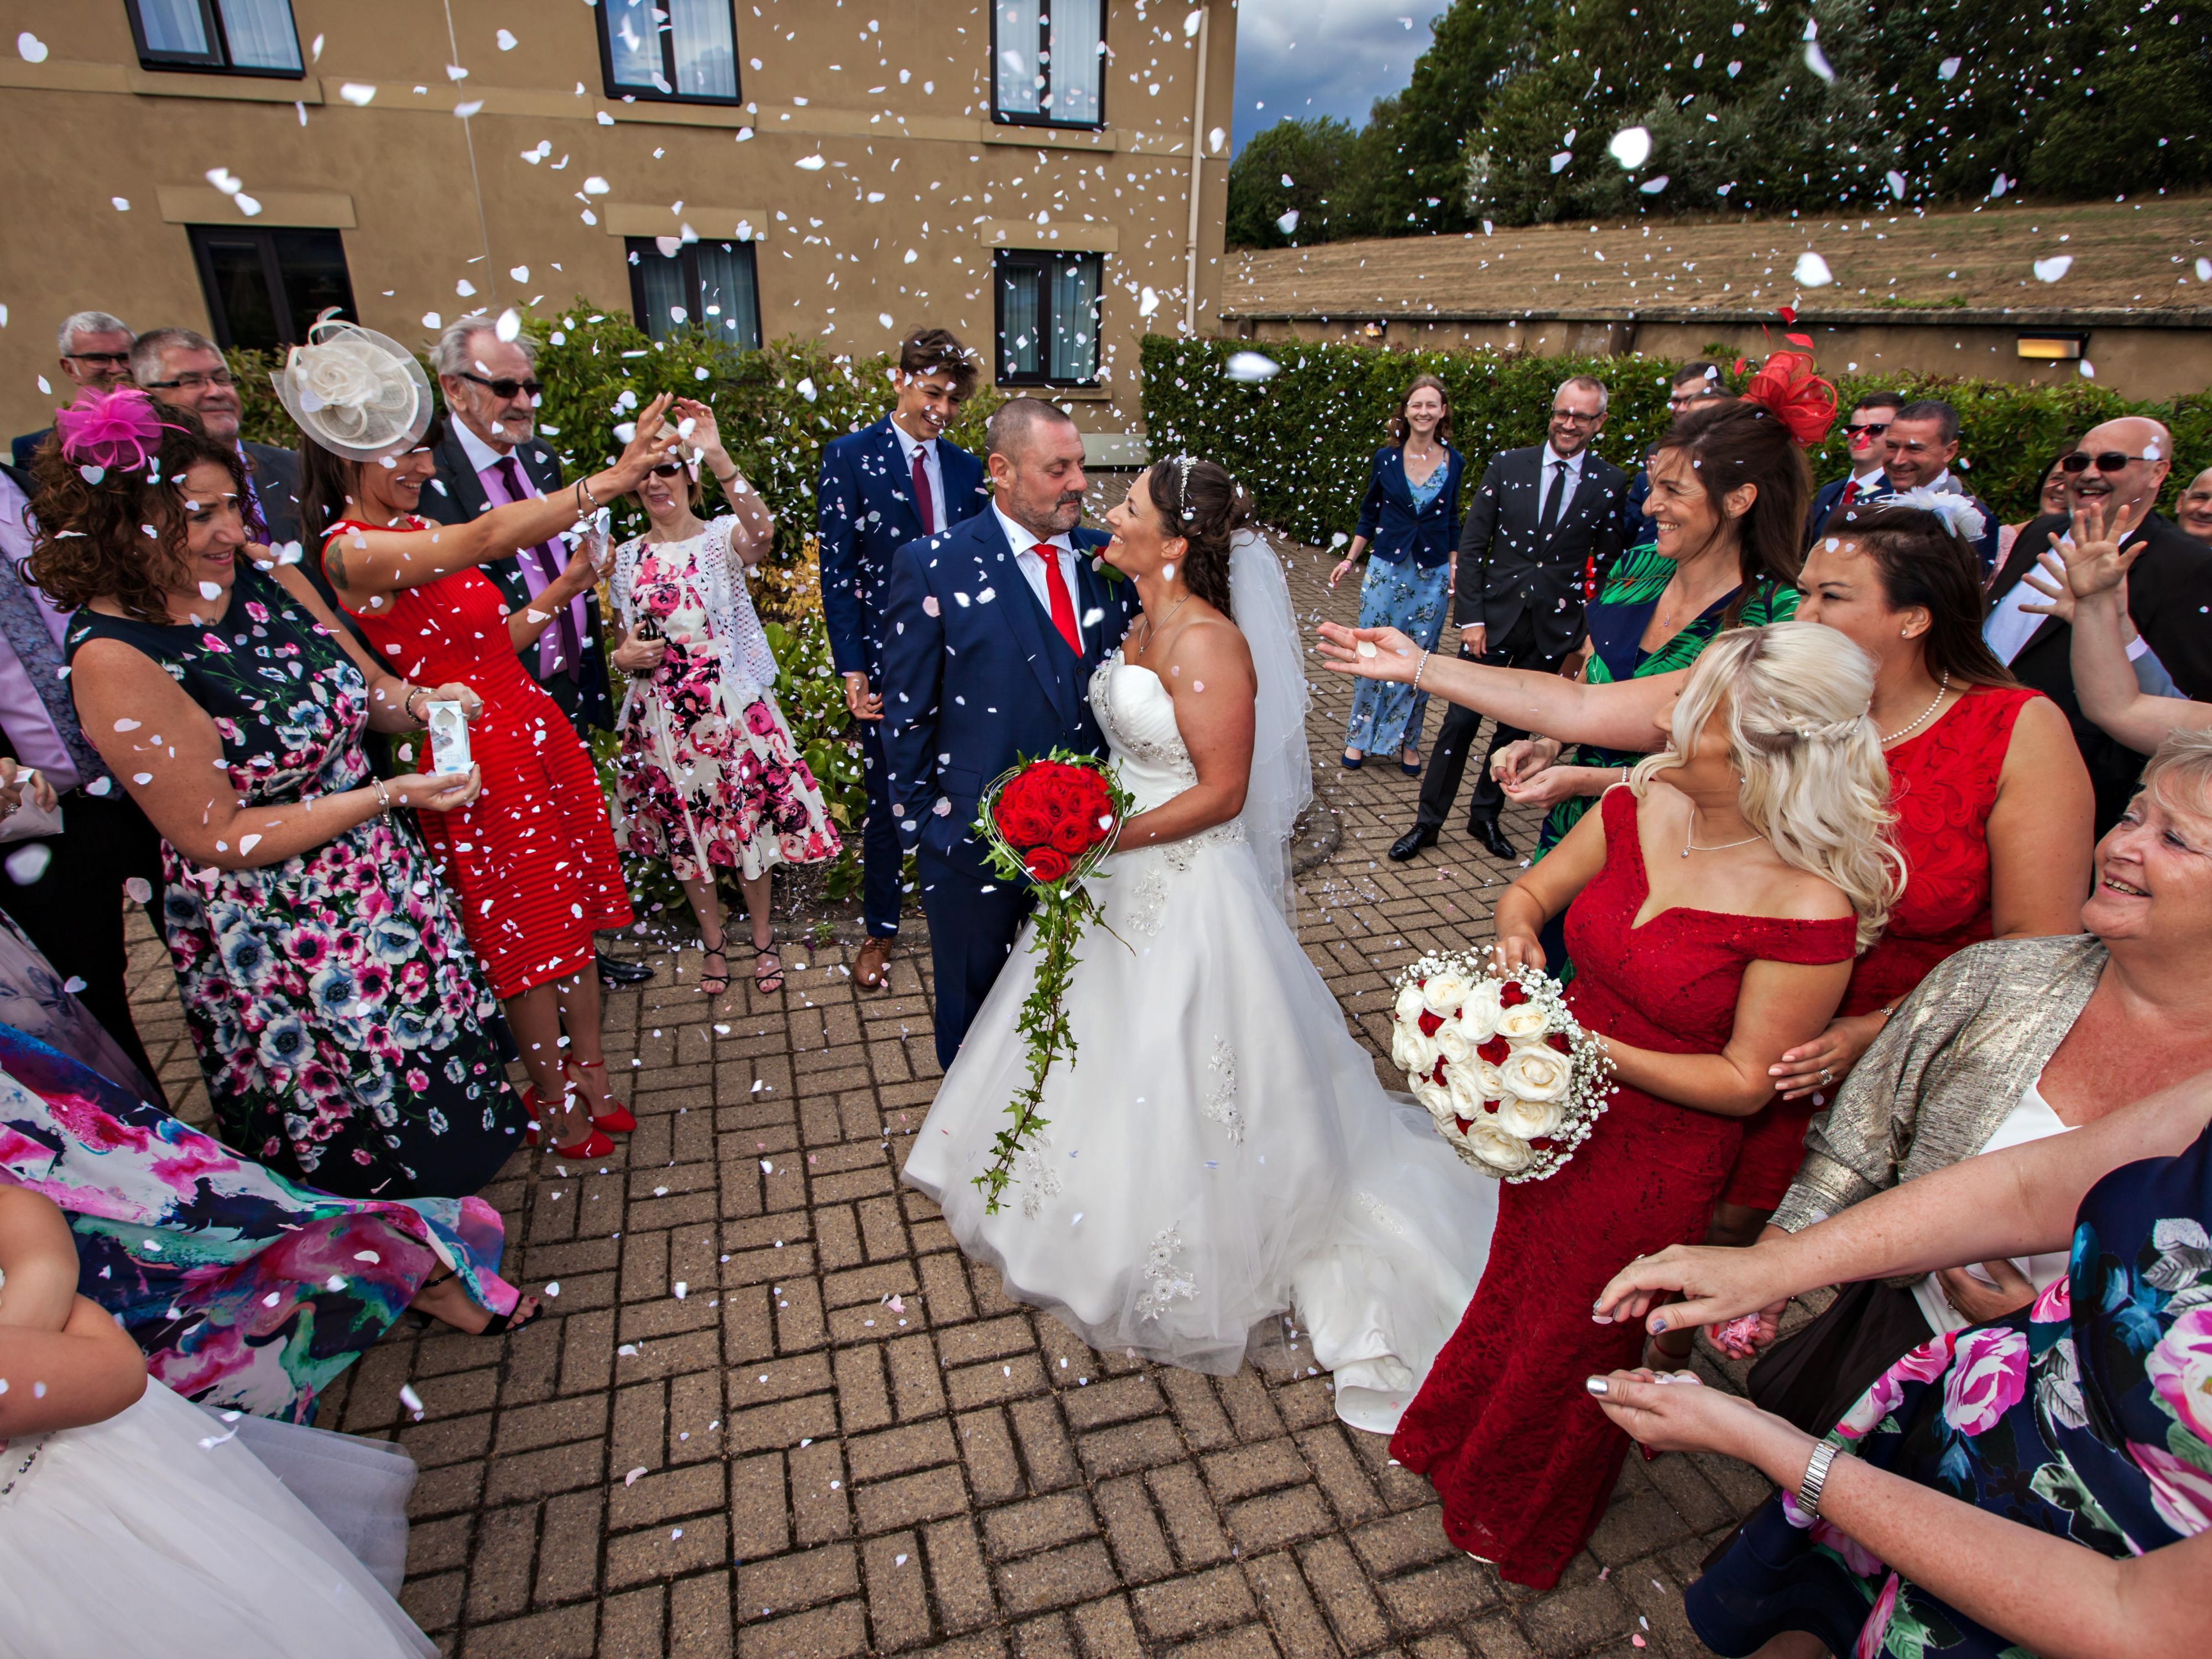 Our hotel offers a range of suites and experienced staff to make your day perfect. We are fully equipped for any style of wedding, including outdoor celebrations in our courtyard.